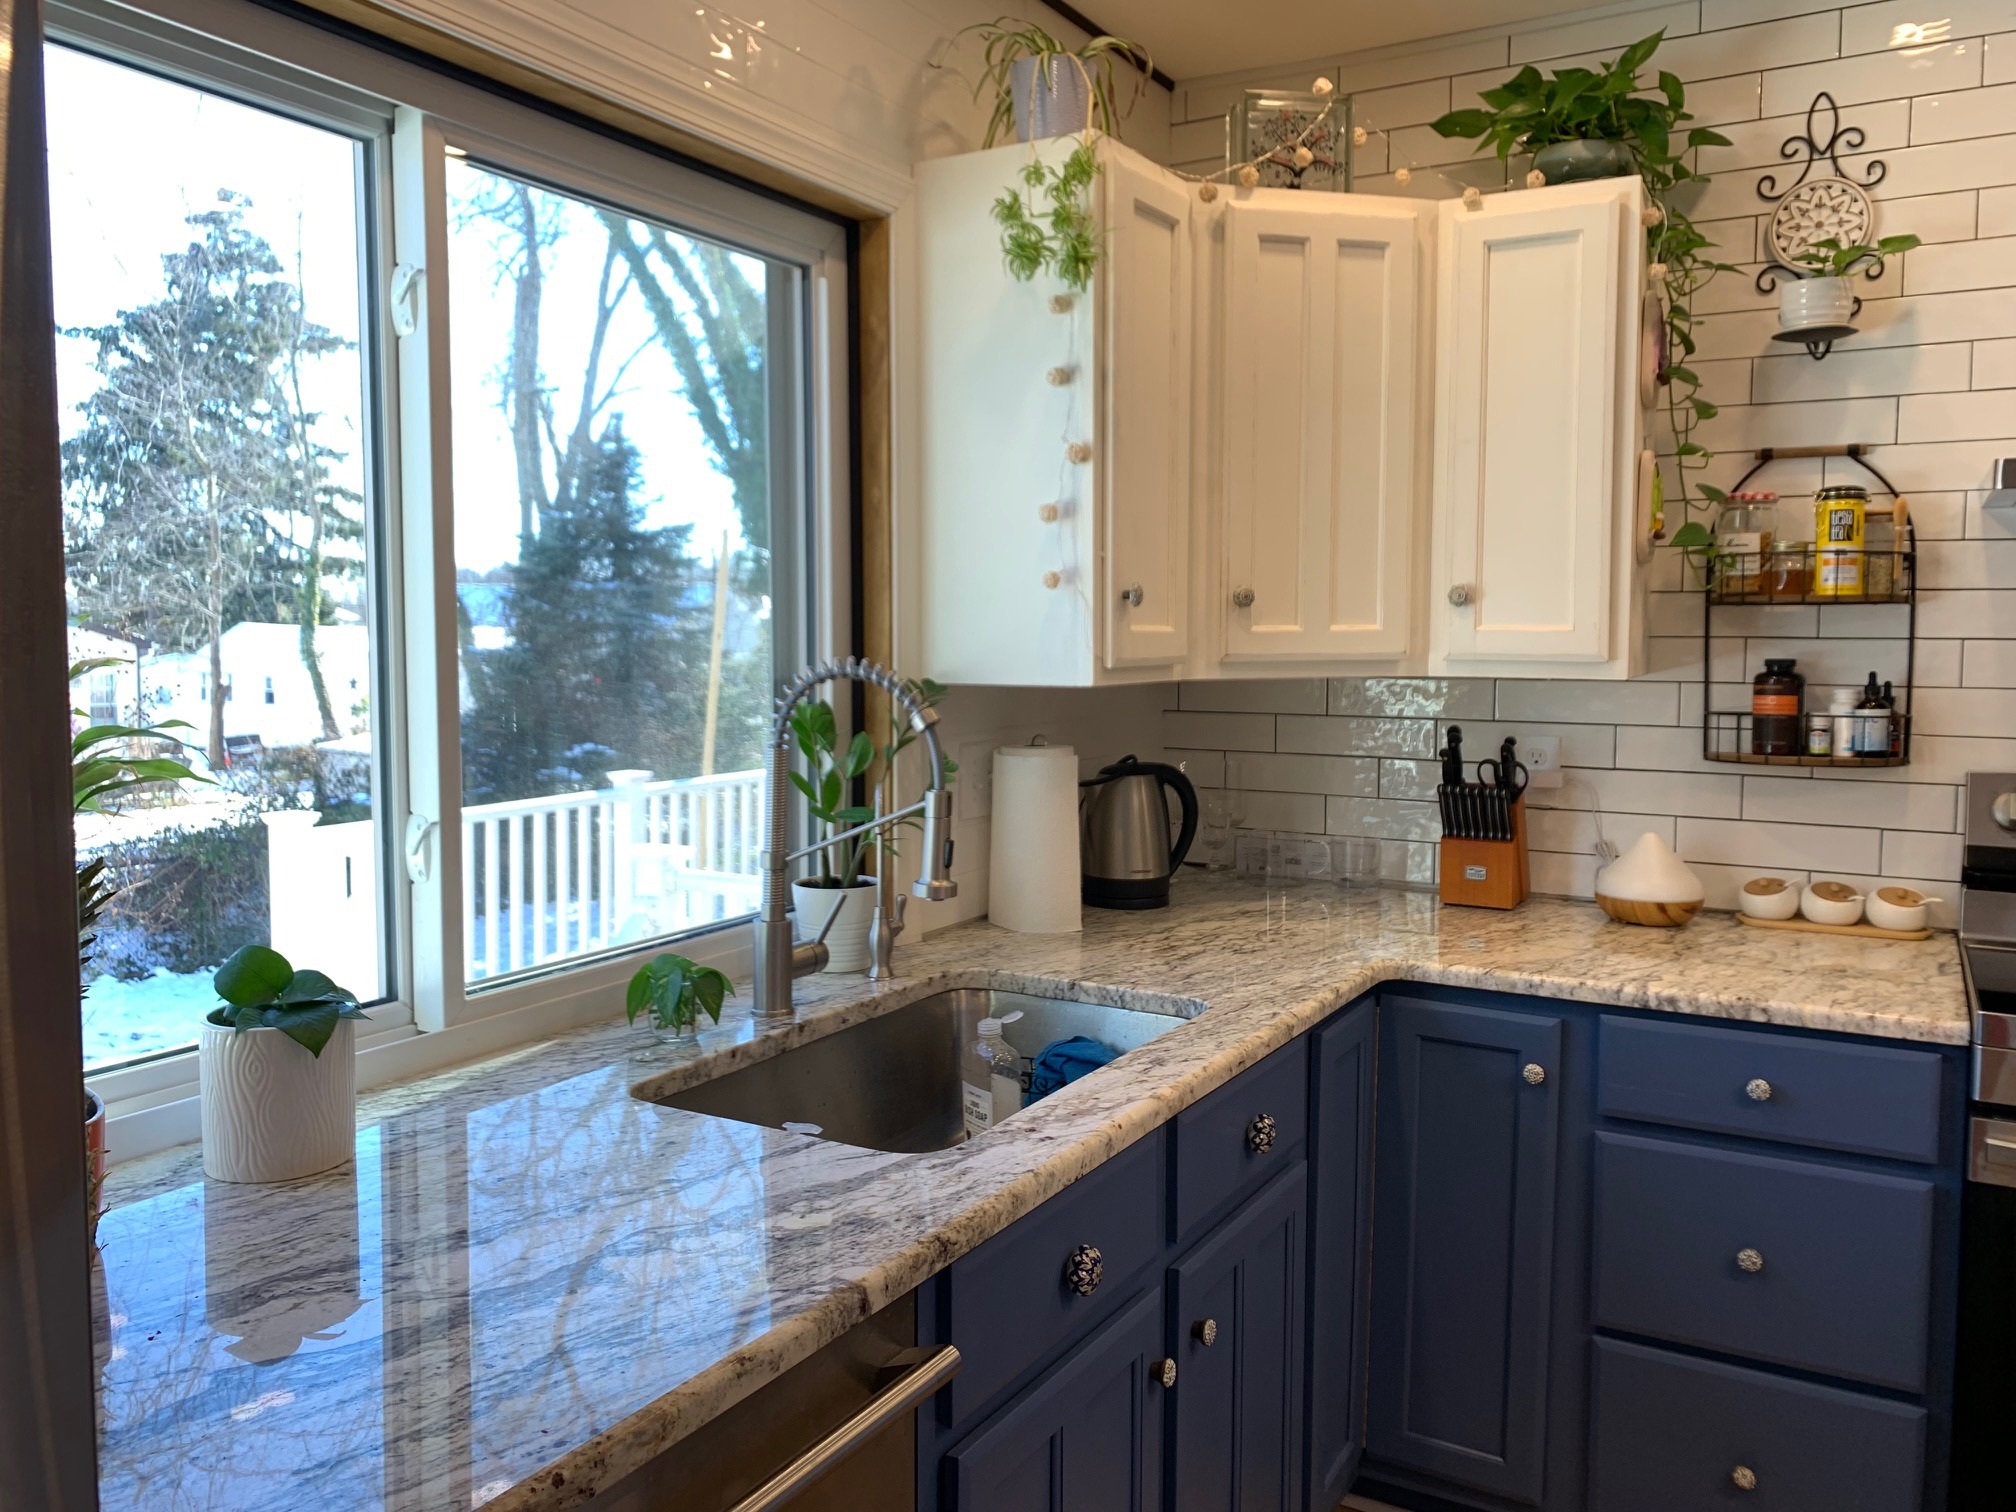 Man Made Quartz vs. Quartzite: Which Is The Right Countertop For You? -  Let's Get Stone'd